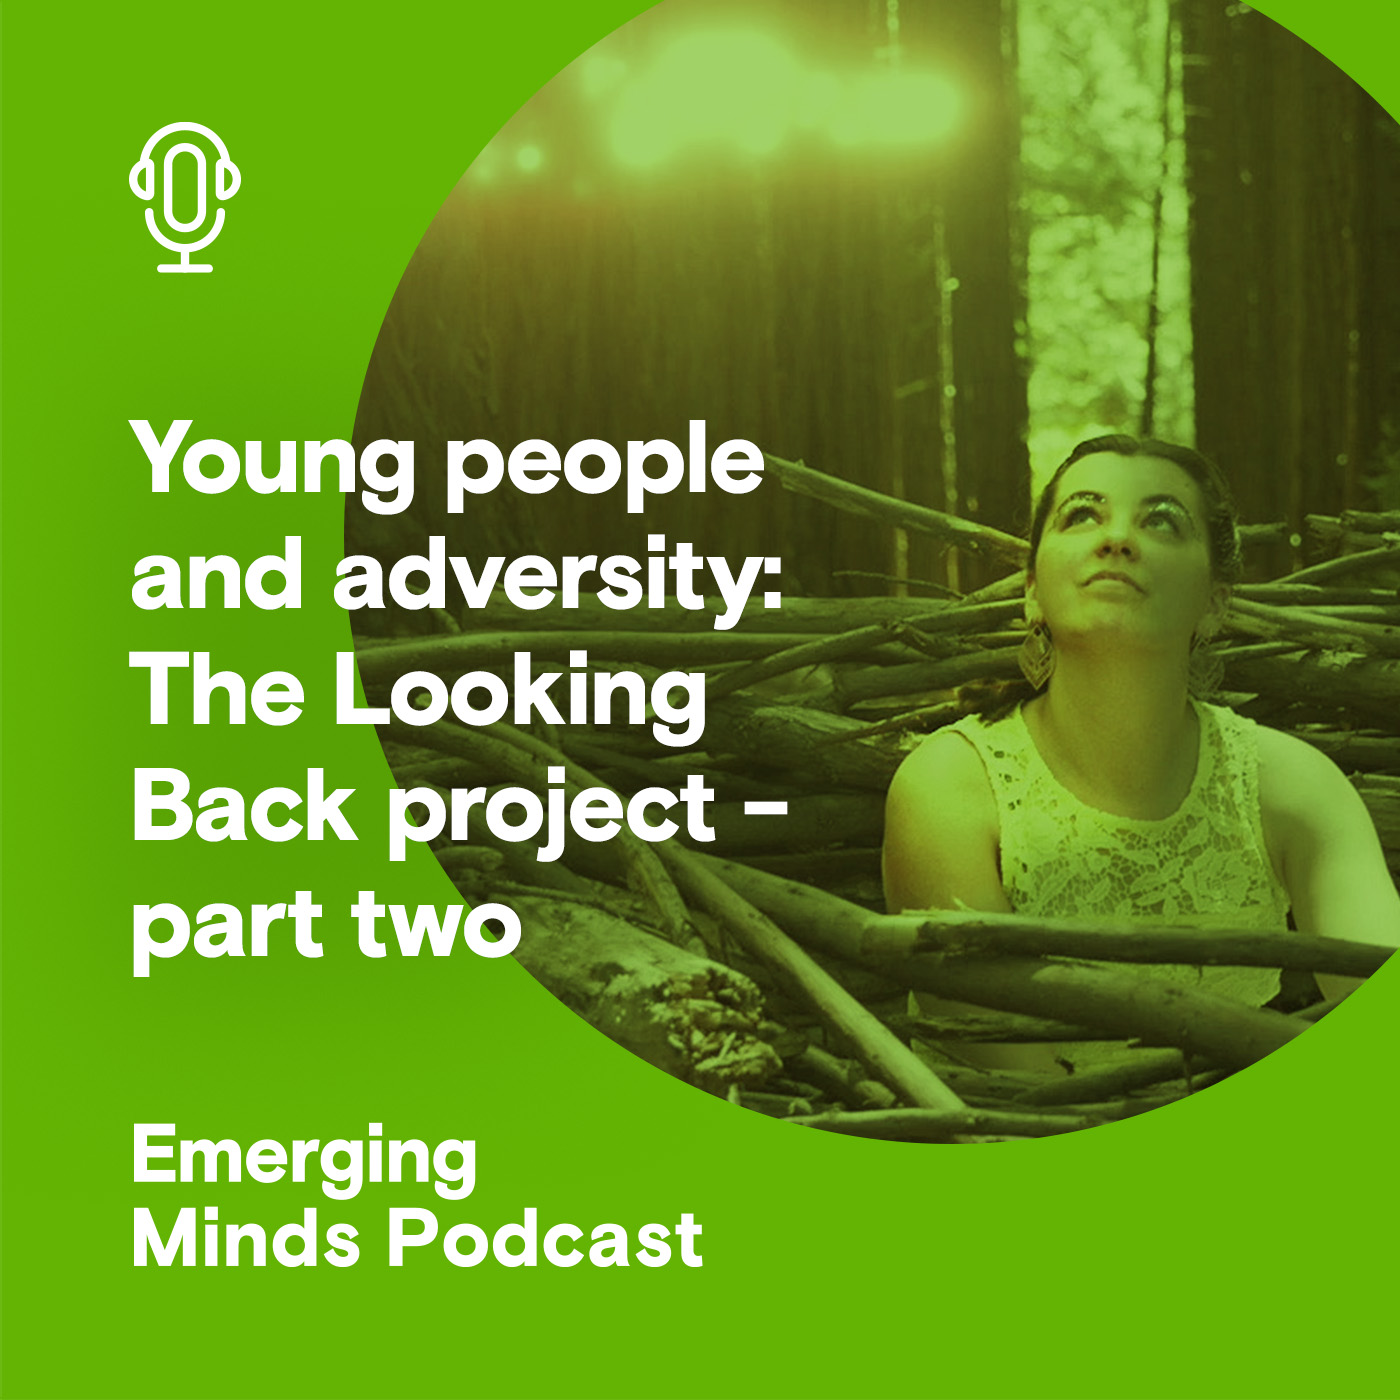 Young people and adversity: The Looking Back project - part two